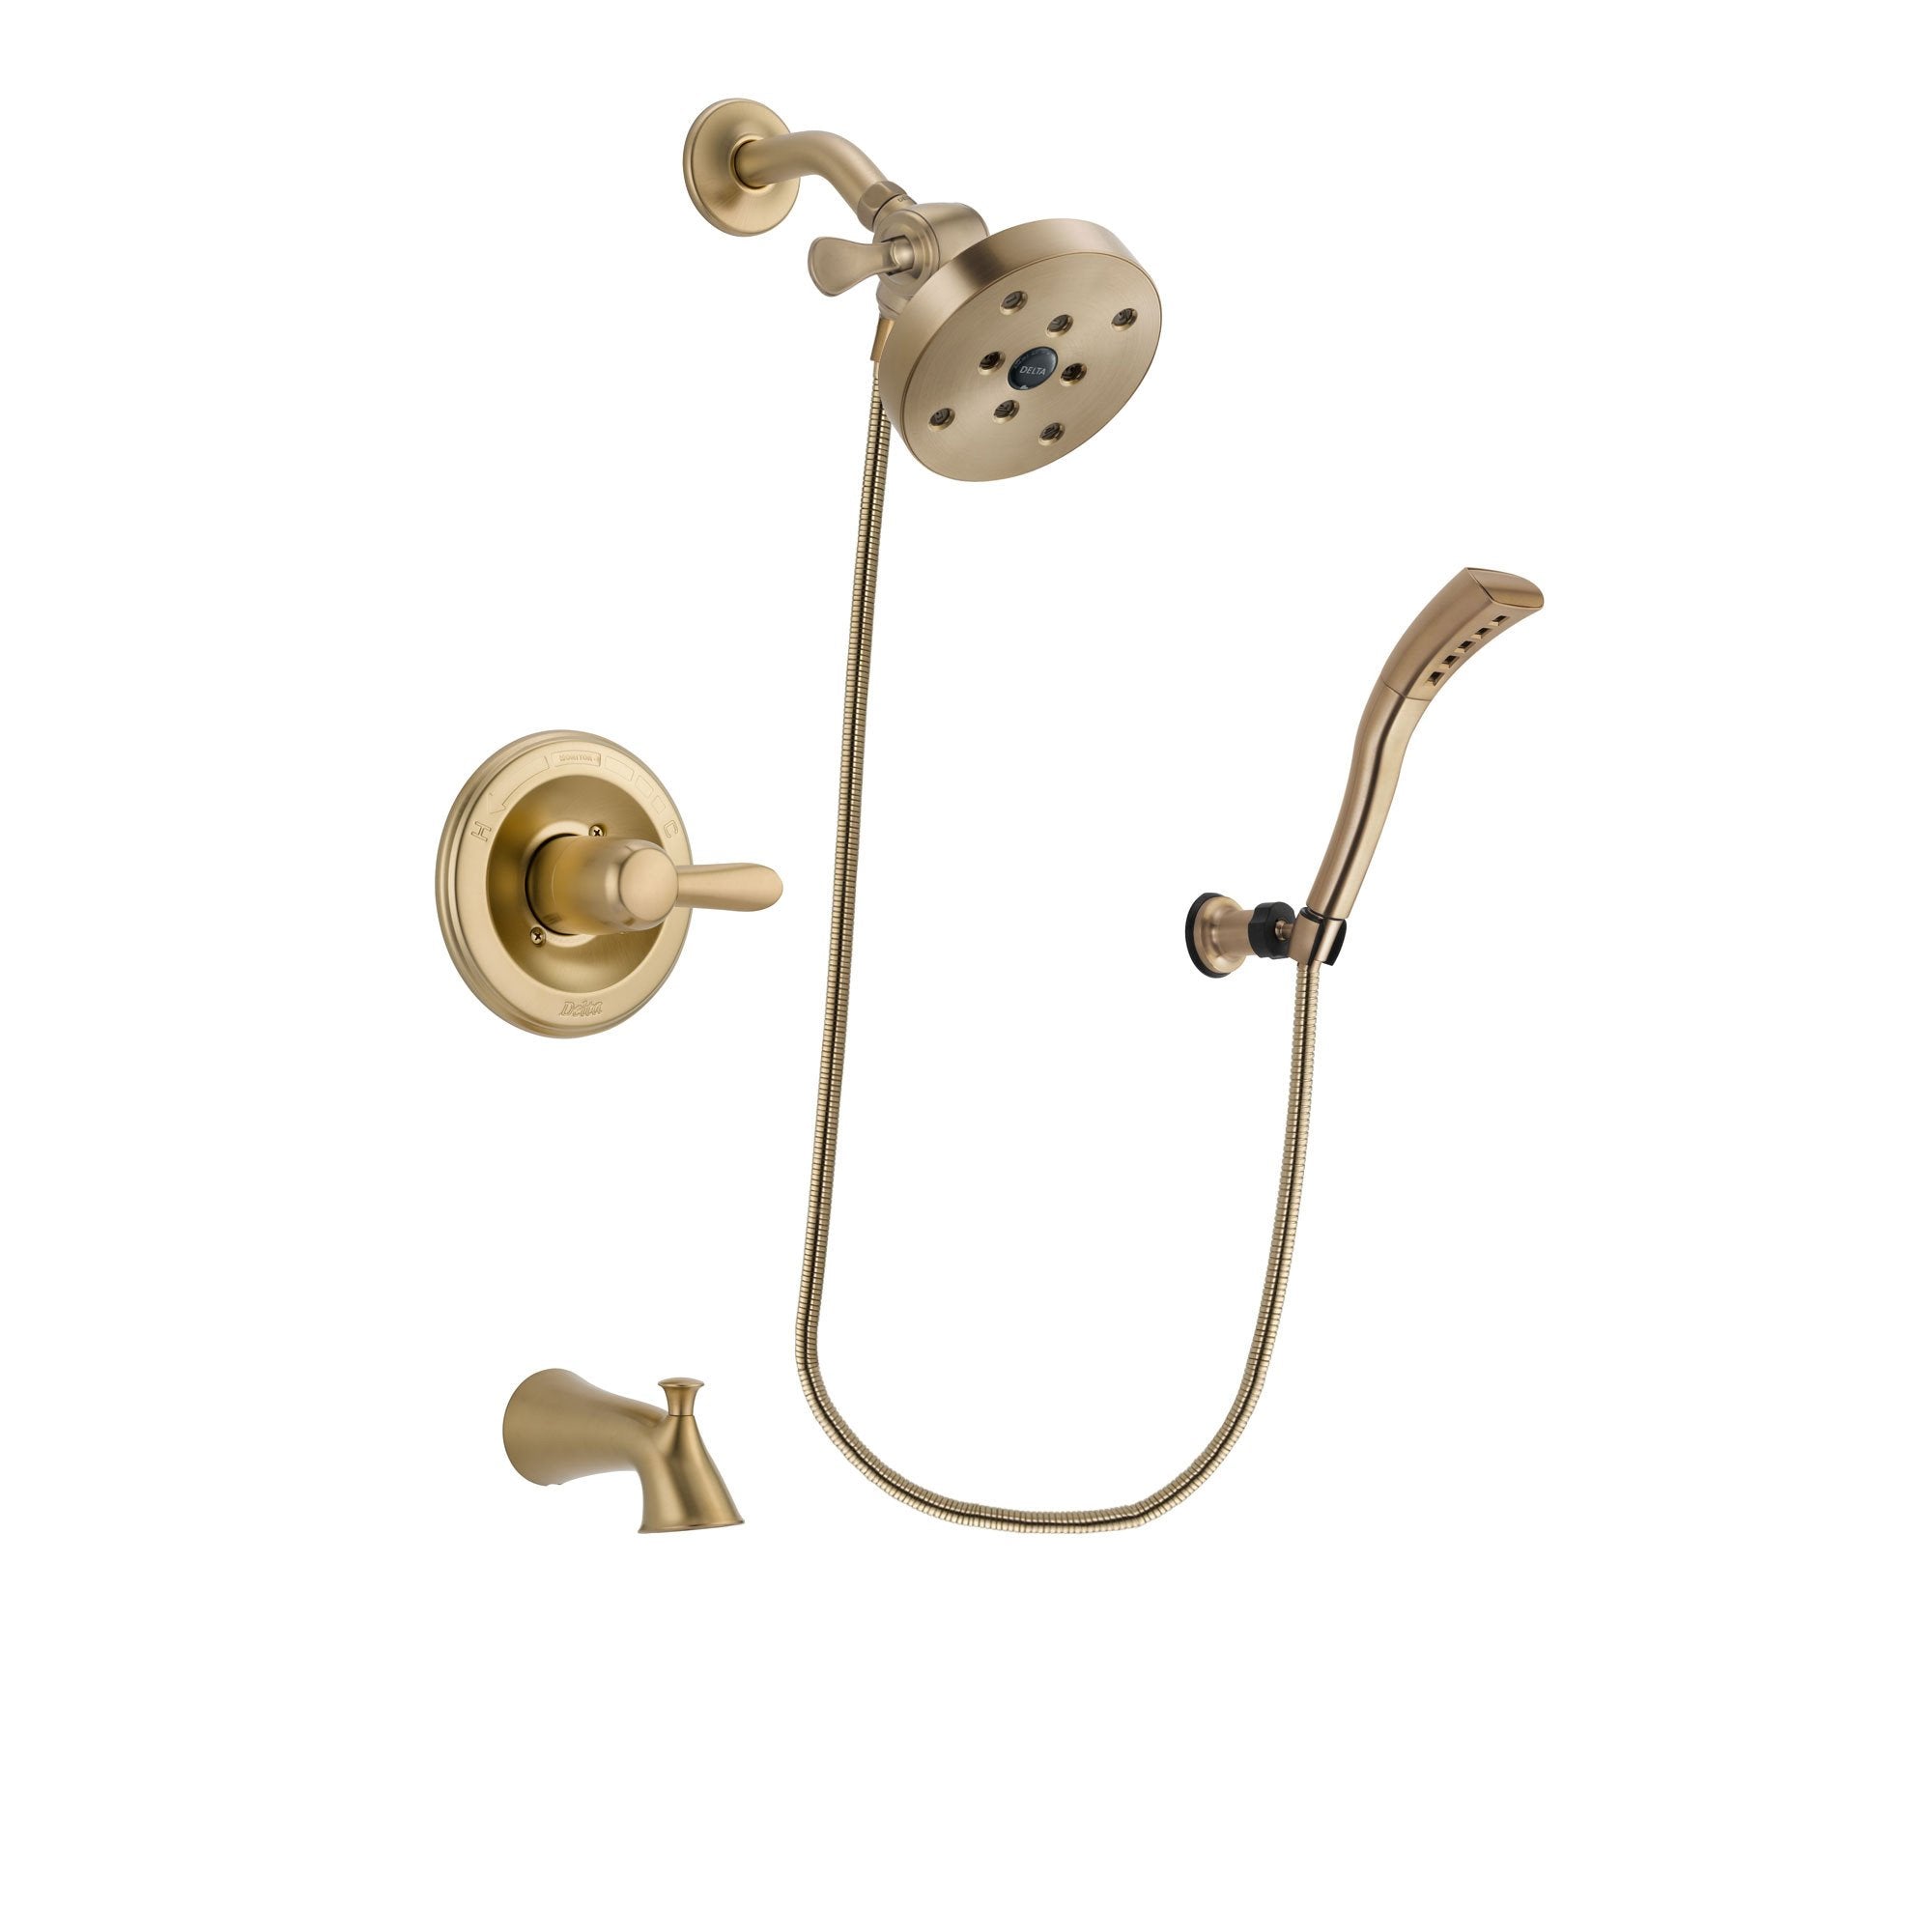 Delta Lahara Champagne Bronze Finish Tub and Shower Faucet System Package with 5-1/2 inch Showerhead and Modern Wall Mount Personal Handheld Shower Spray Includes Rough-in Valve and Tub Spout DSP3715V